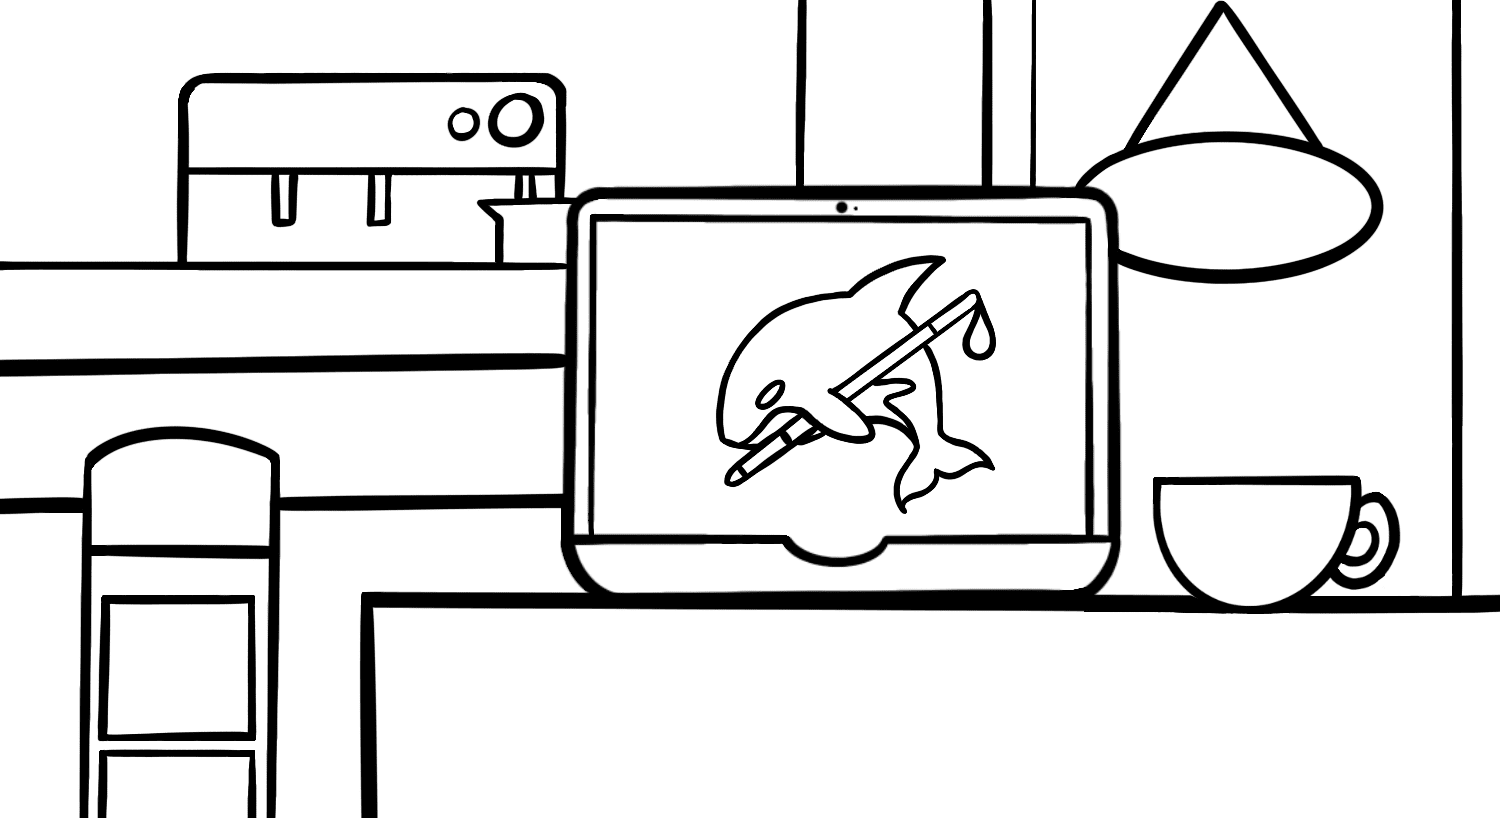 Illustration: A laptop sits on a table in a café, with the bar counter and espresso machine in the background. The laptop screen displays the Orca logo of an orca whale holding a guide cane.